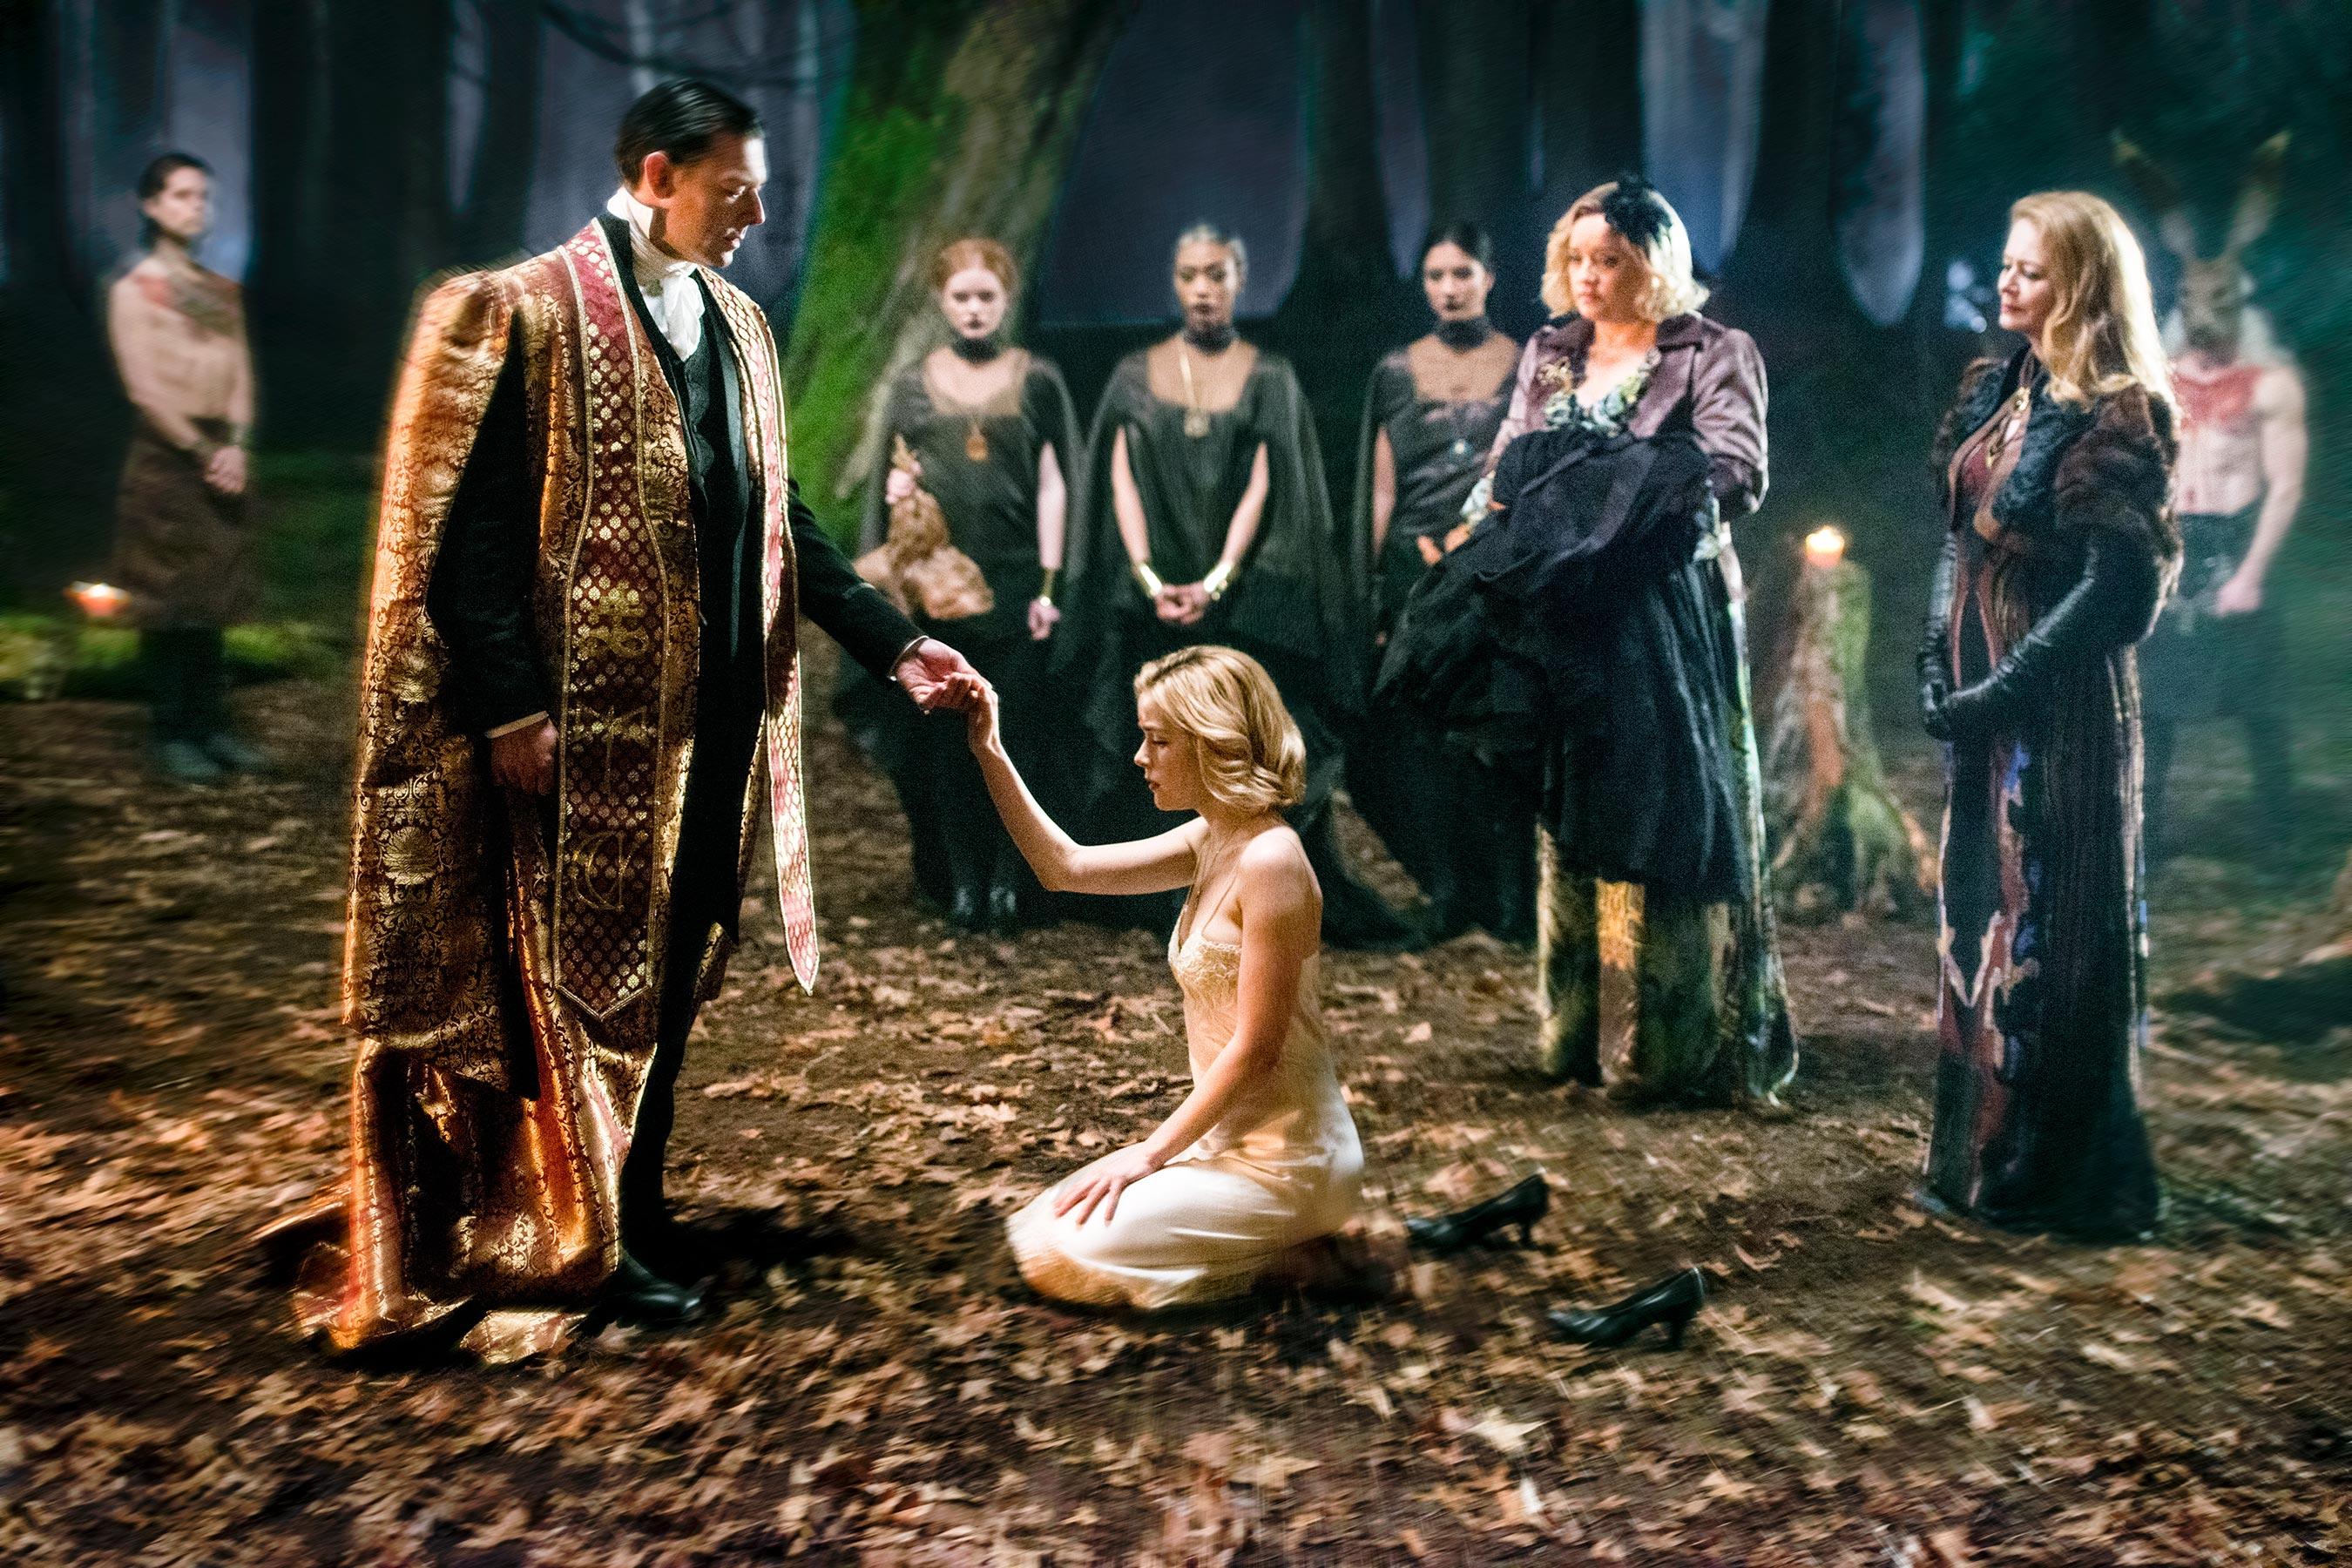 New Chilling Adventures of Sabrina Image Tease Netflix's New Series